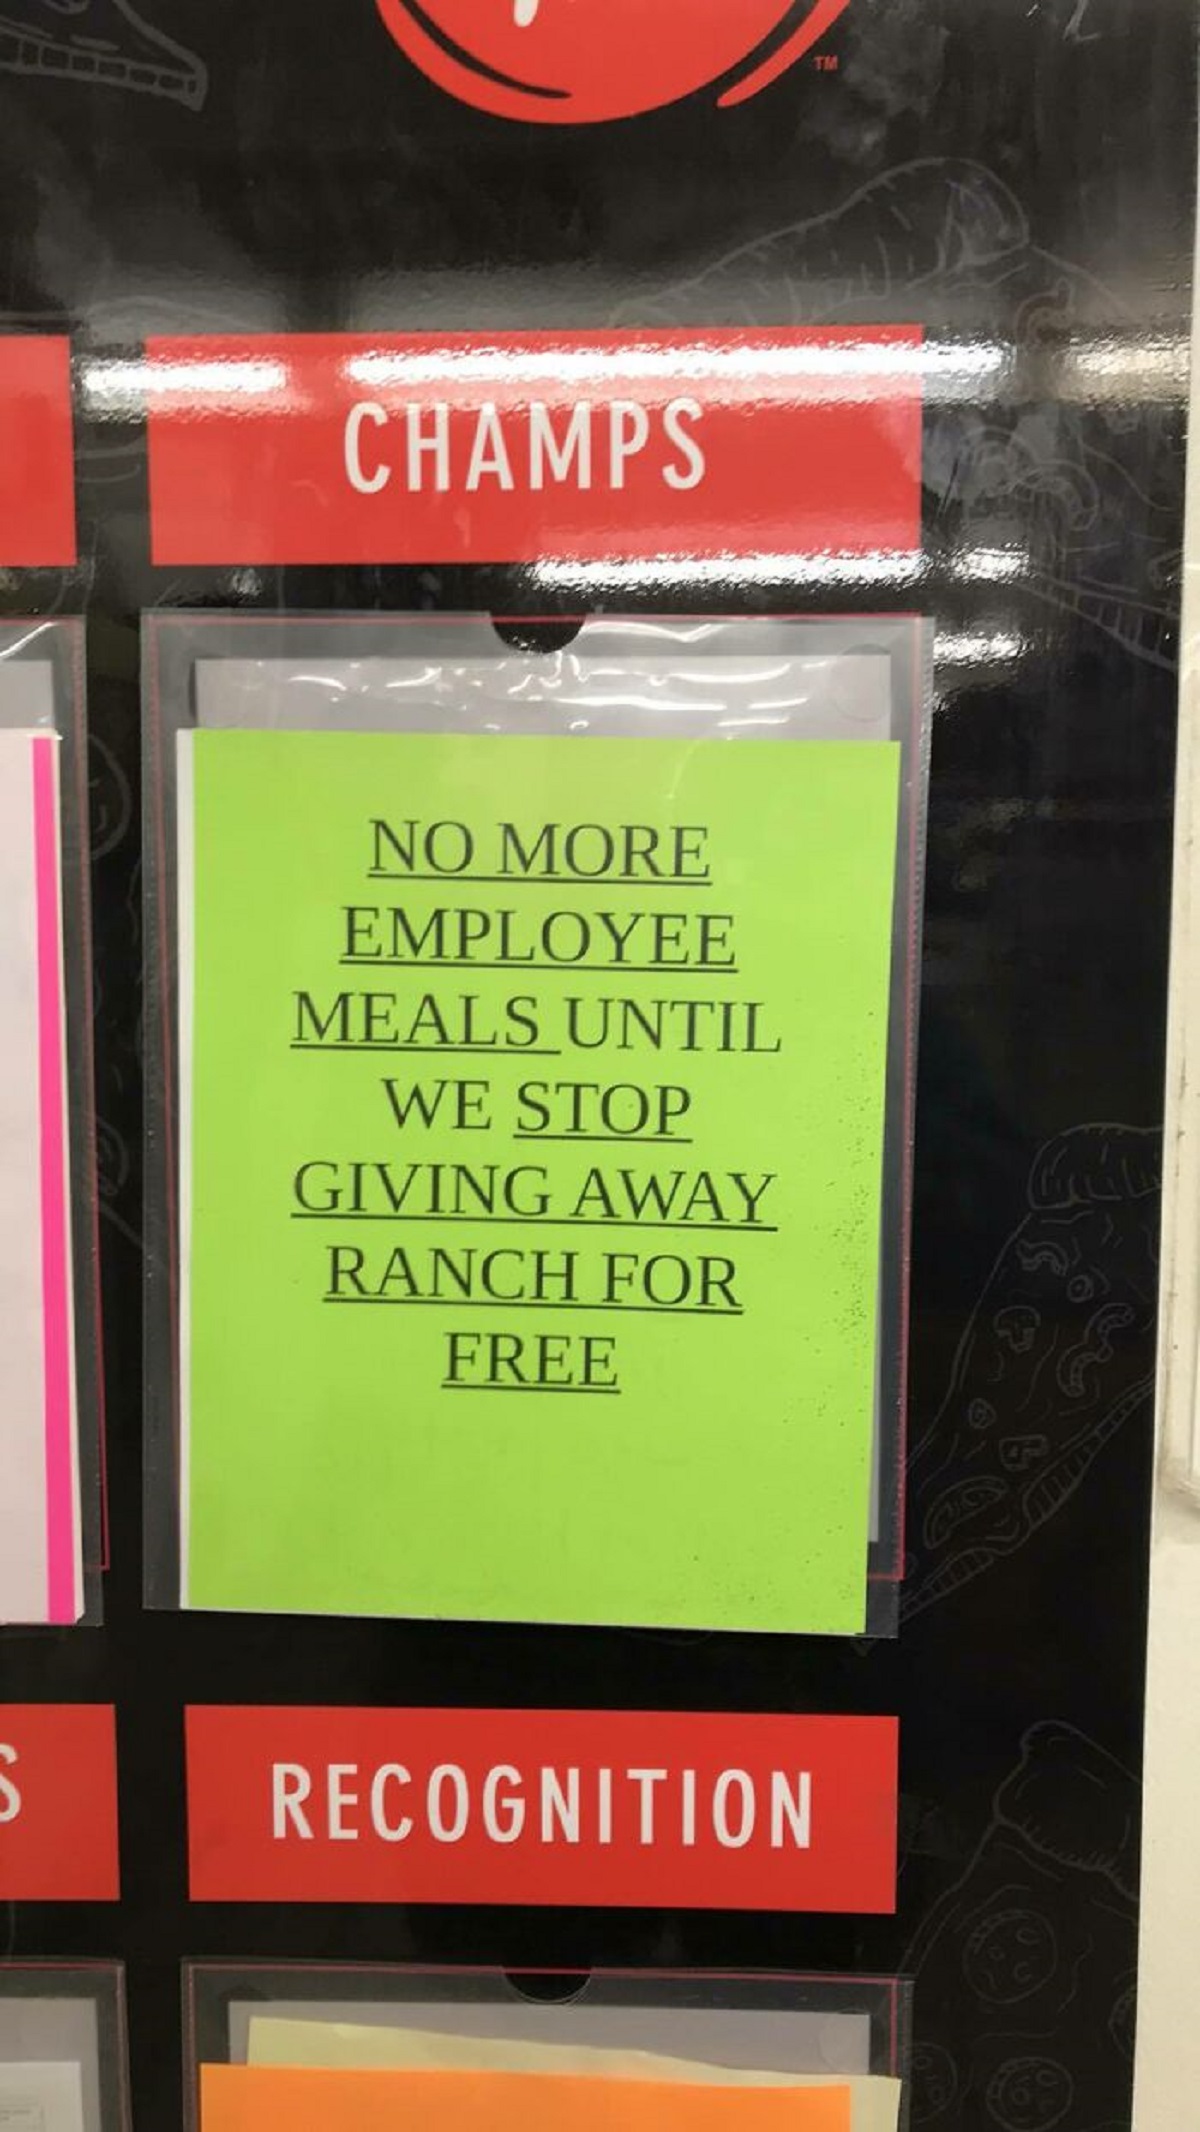 signage - Champs No More Employee Meals Until We Stop Giving Away Ranch For Free 5 Recognition